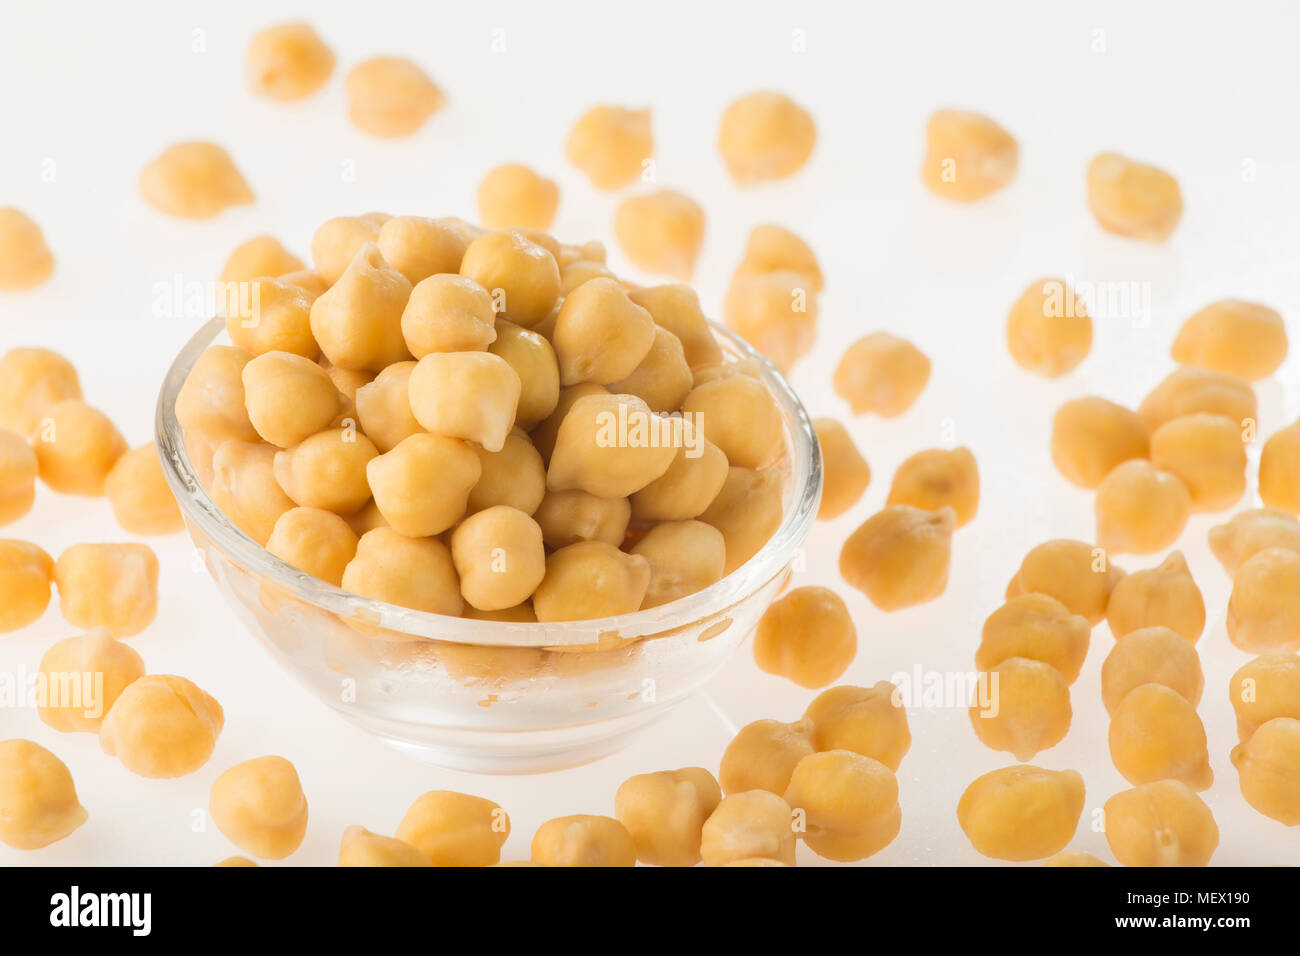 Chickpea grains (Cicer arietinum) in bowl isolated on white background Stock Photo